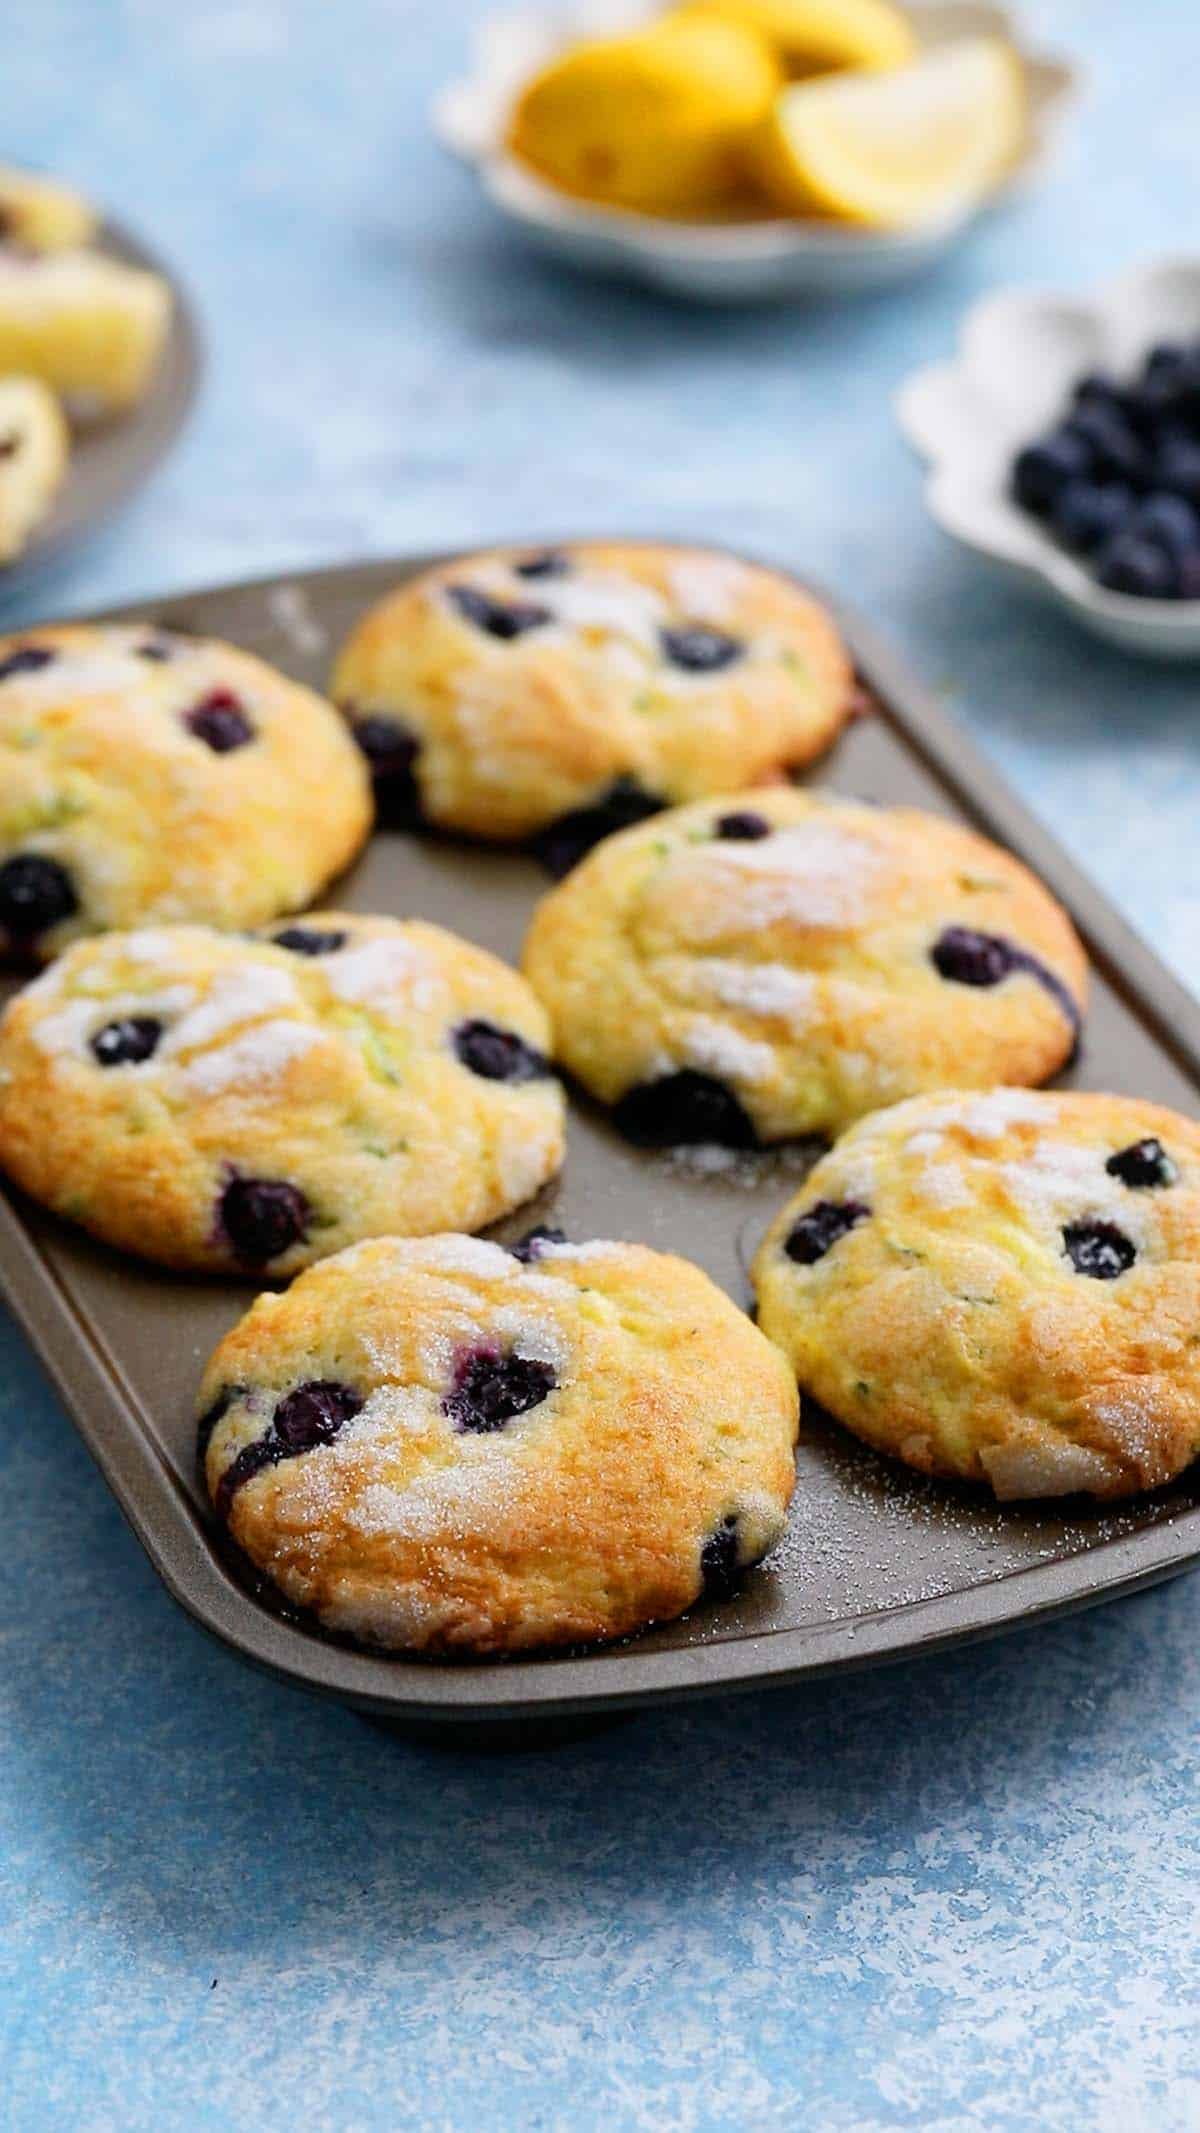 6 cup muffin pan with baked blueberry muffins.